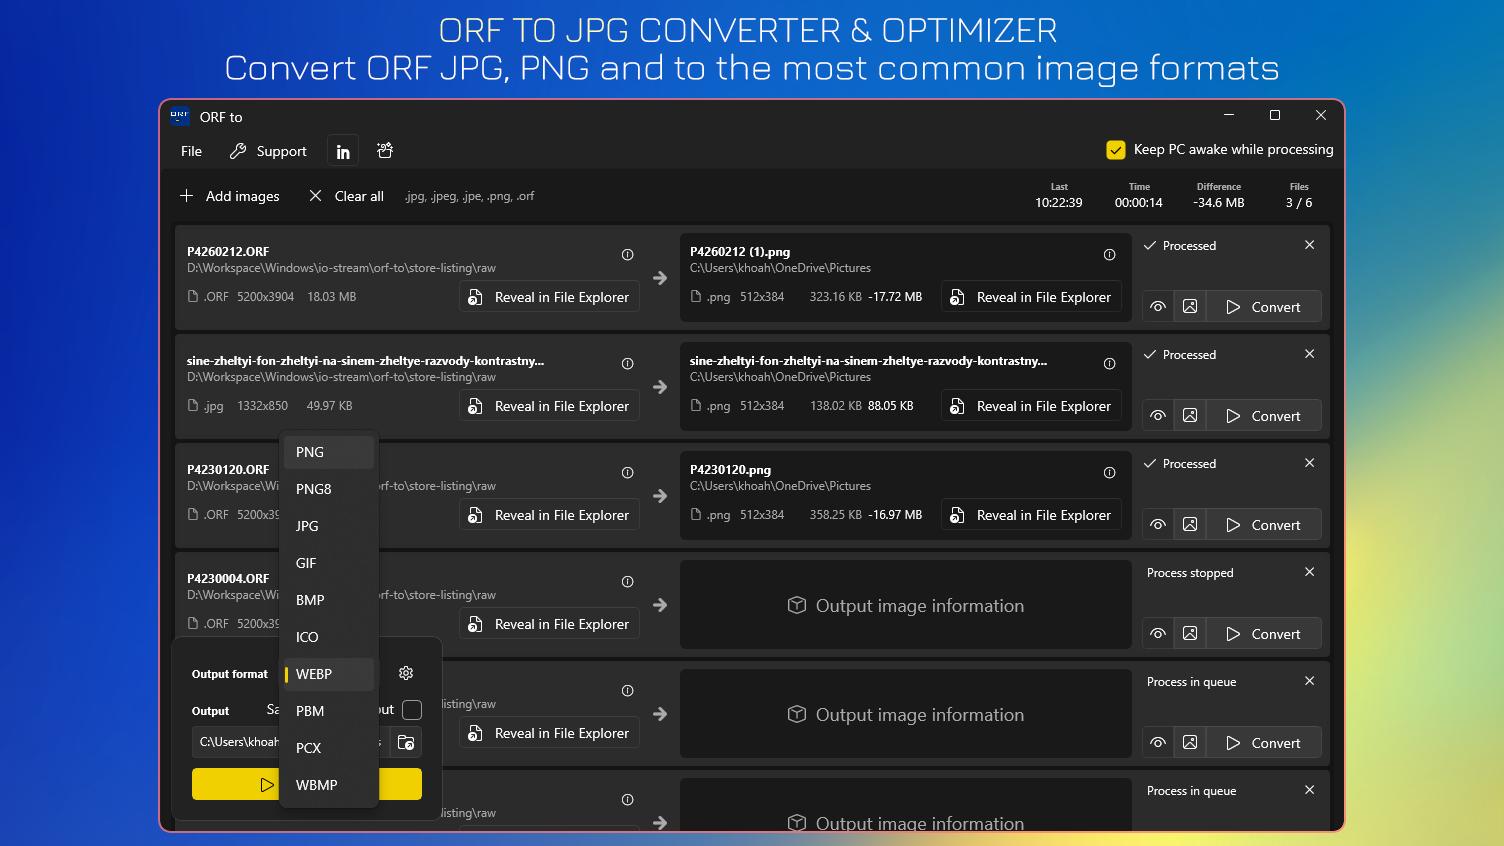 ORF to JPG Converter & Optimizer - Convert ORF to JPG, PNG and the most common image formats